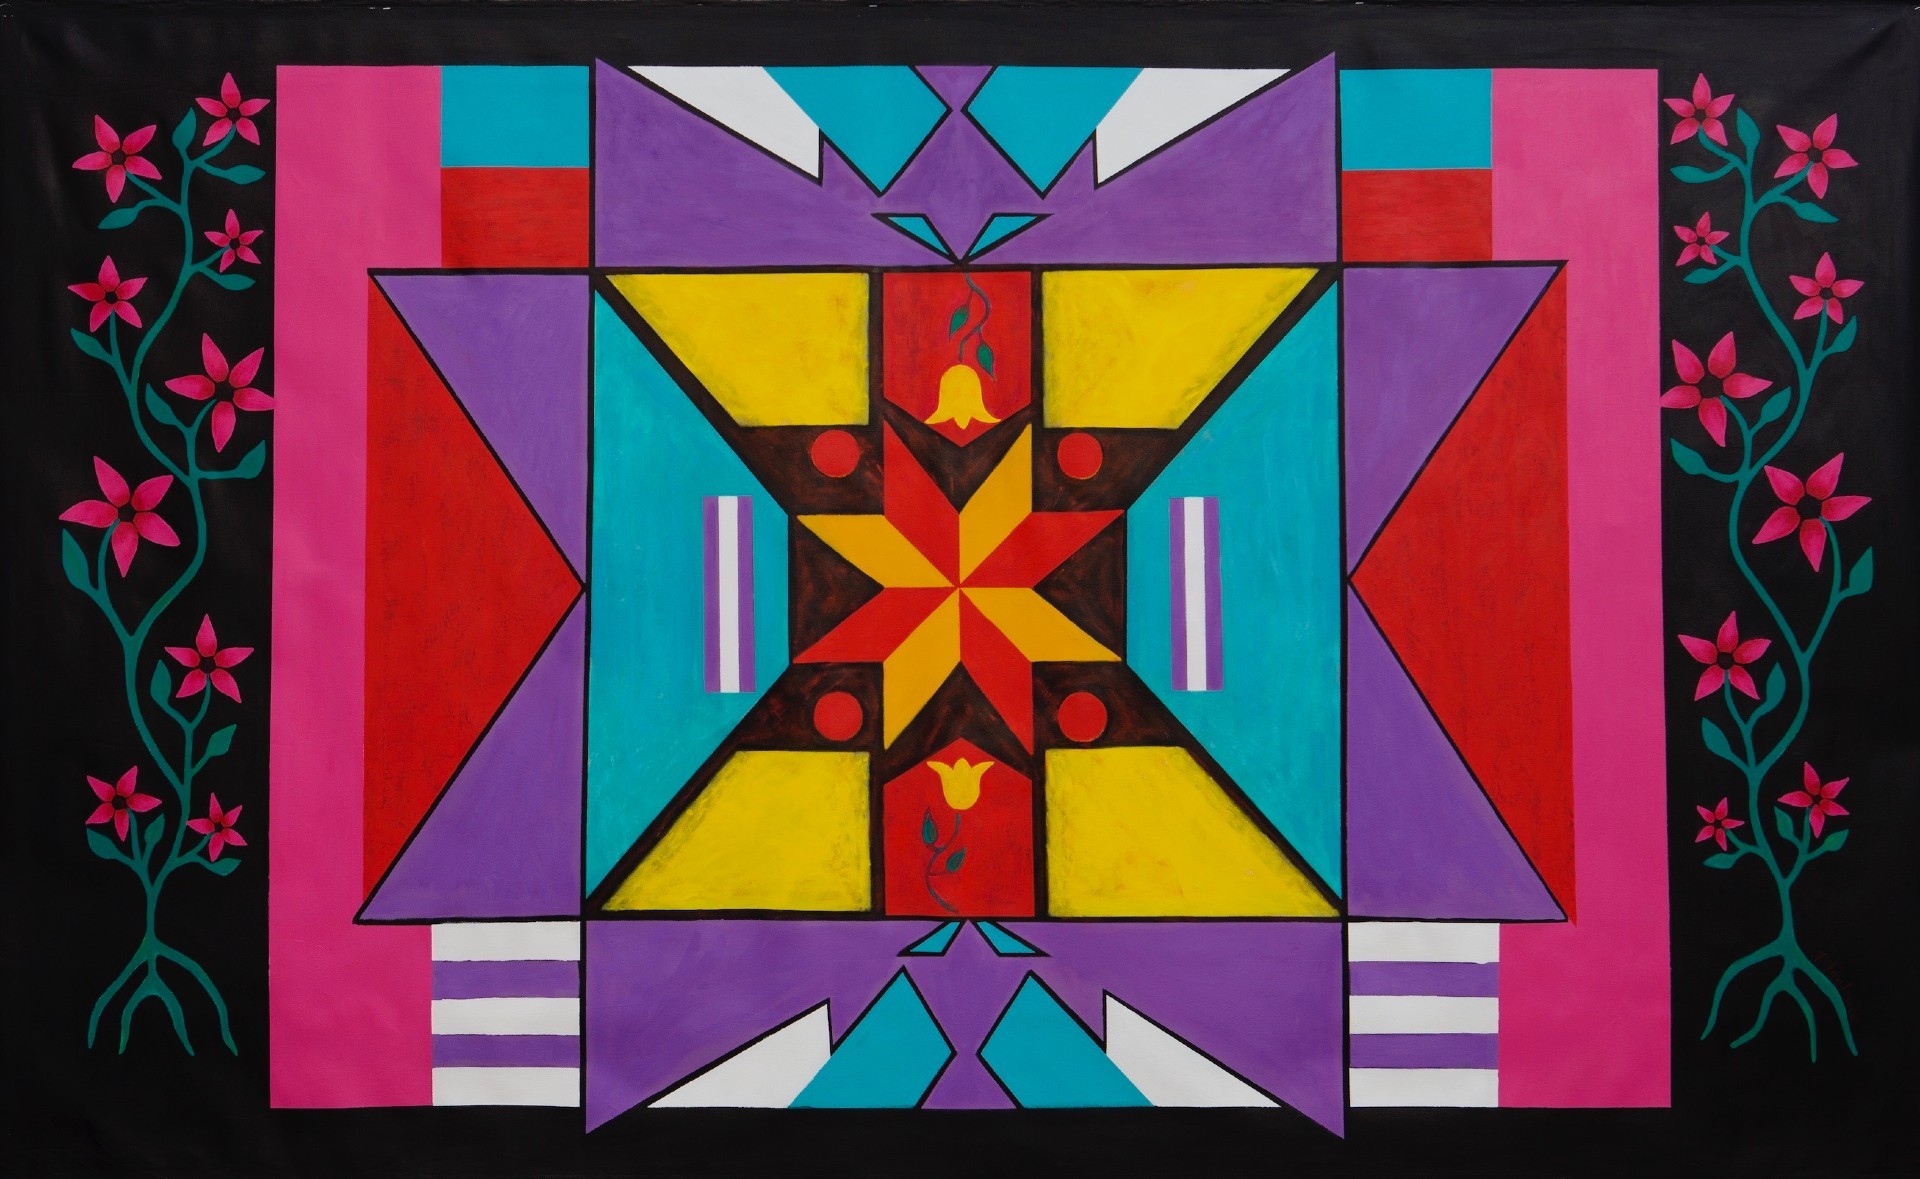 “Tradition in Transformation”, a painting by Janice Toulouse